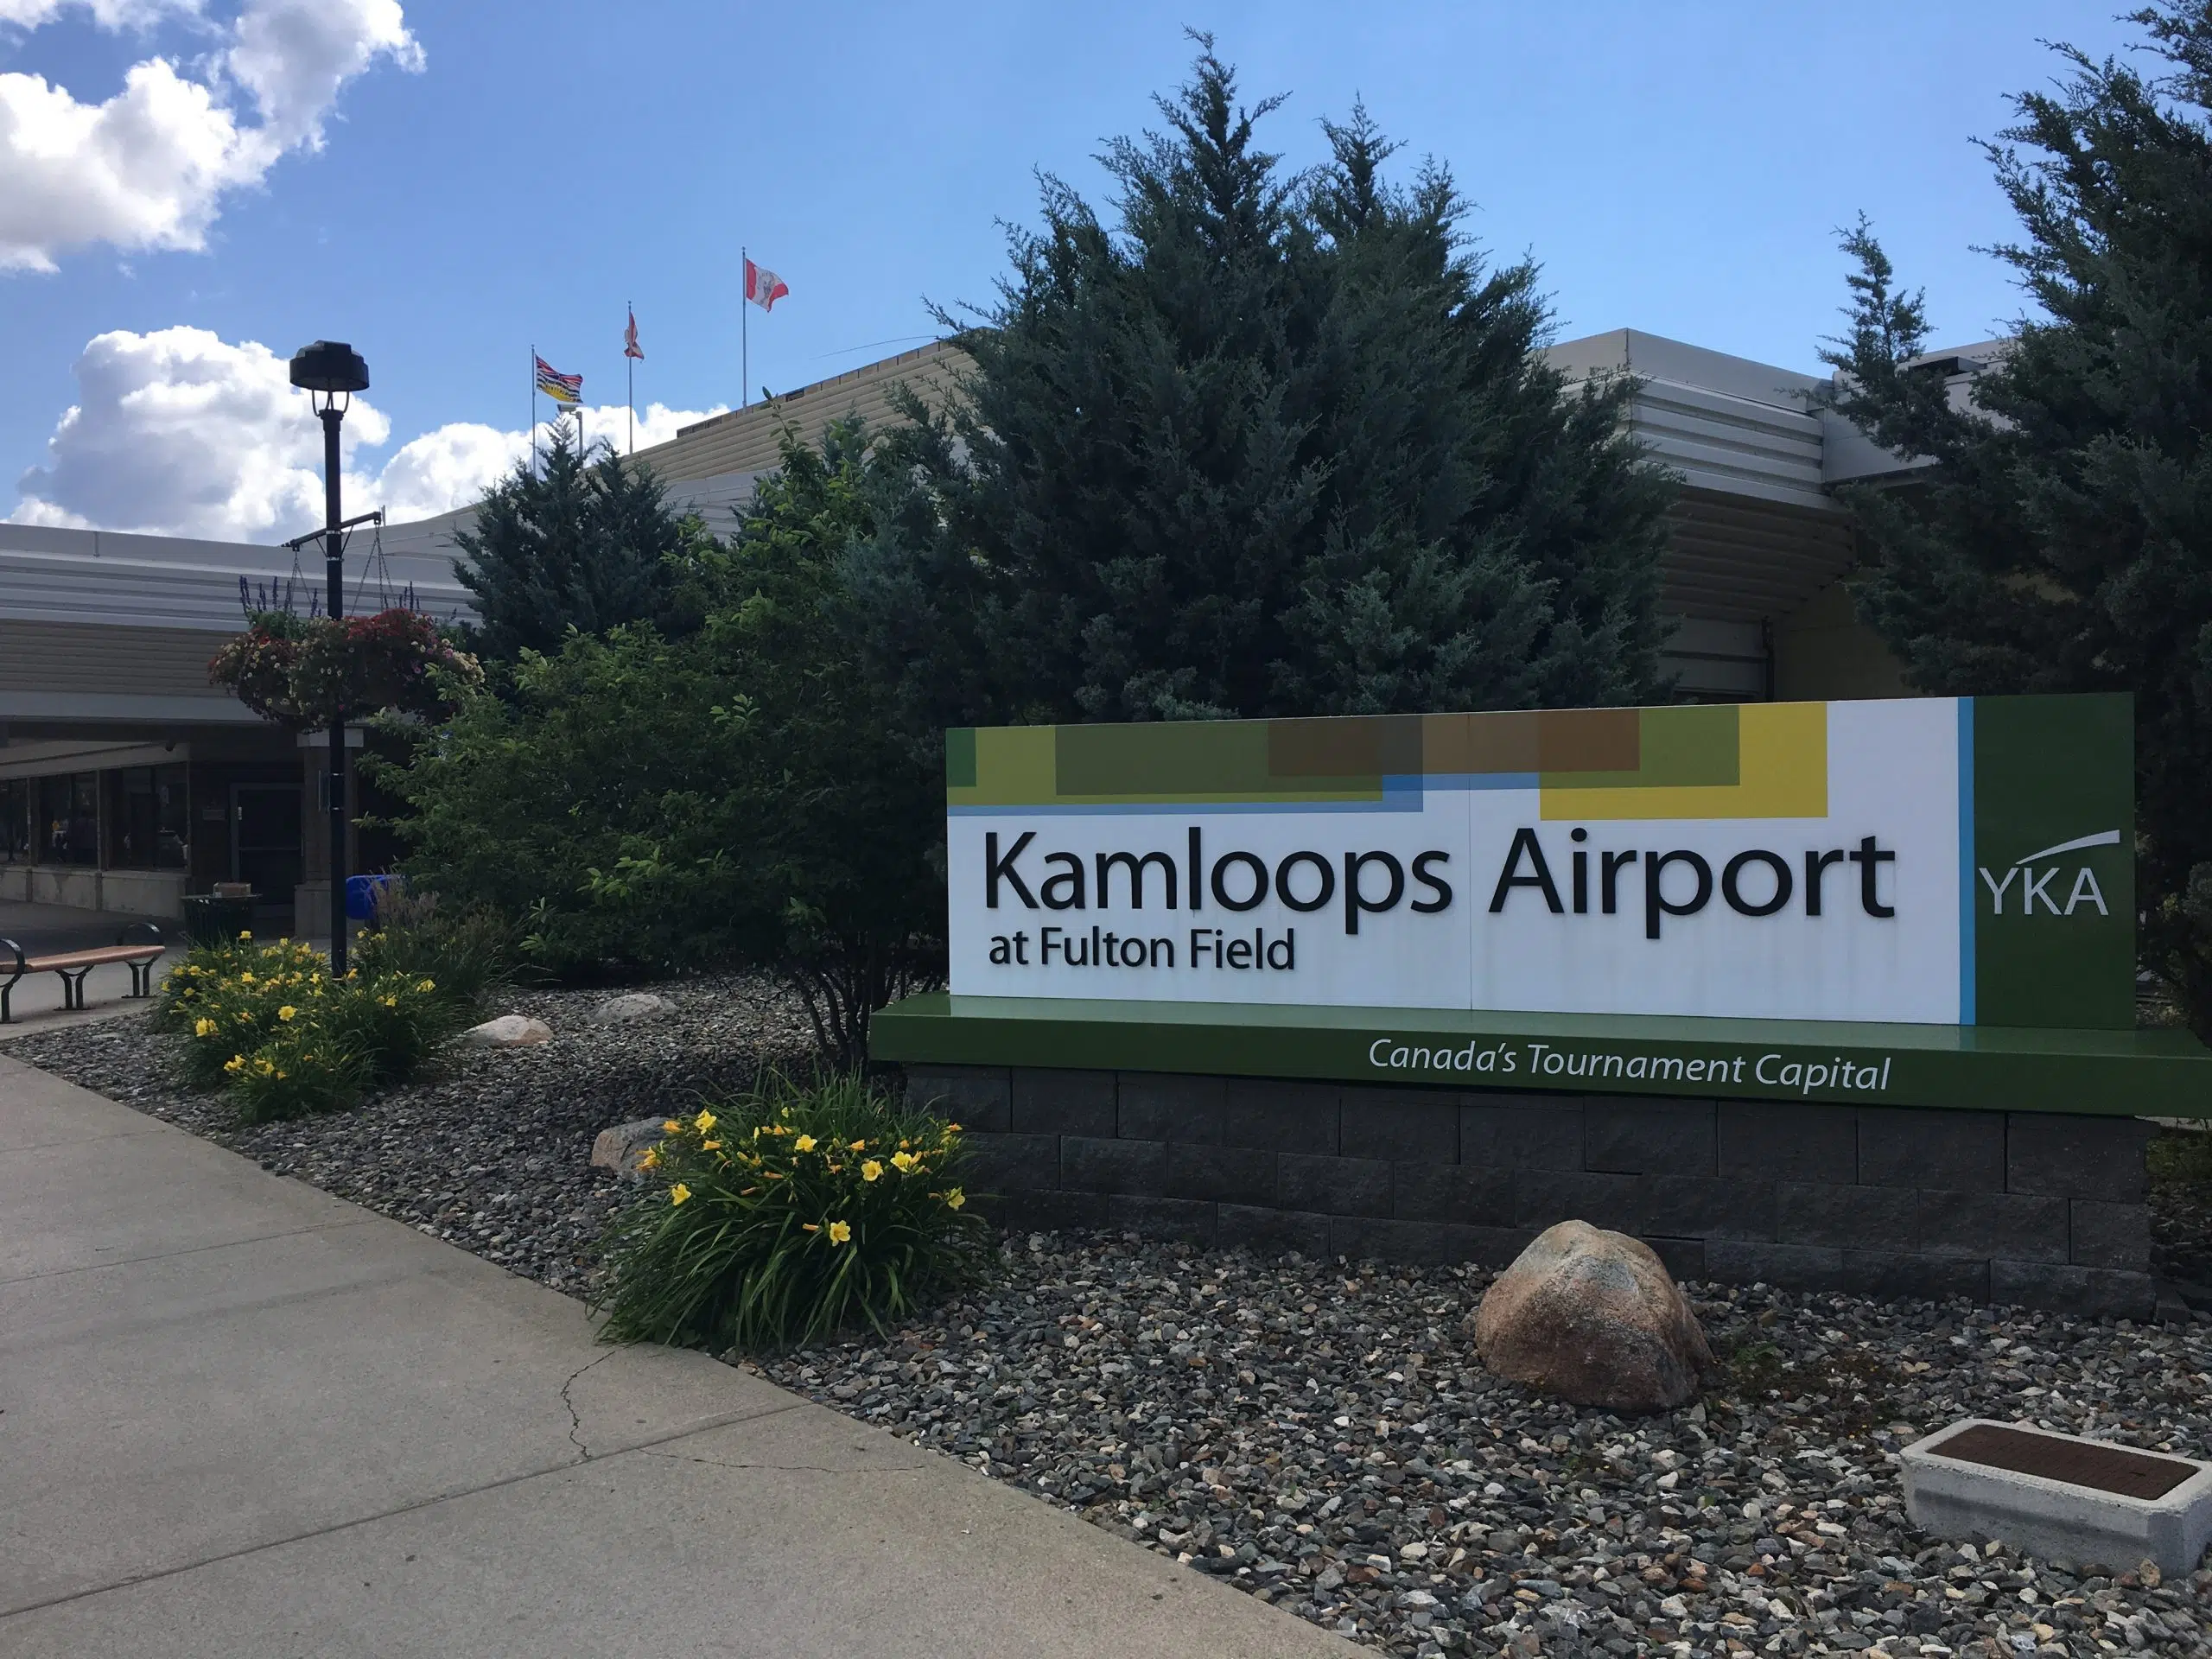 Kamloops Airport looking at potential expansion both on the ground and in the air